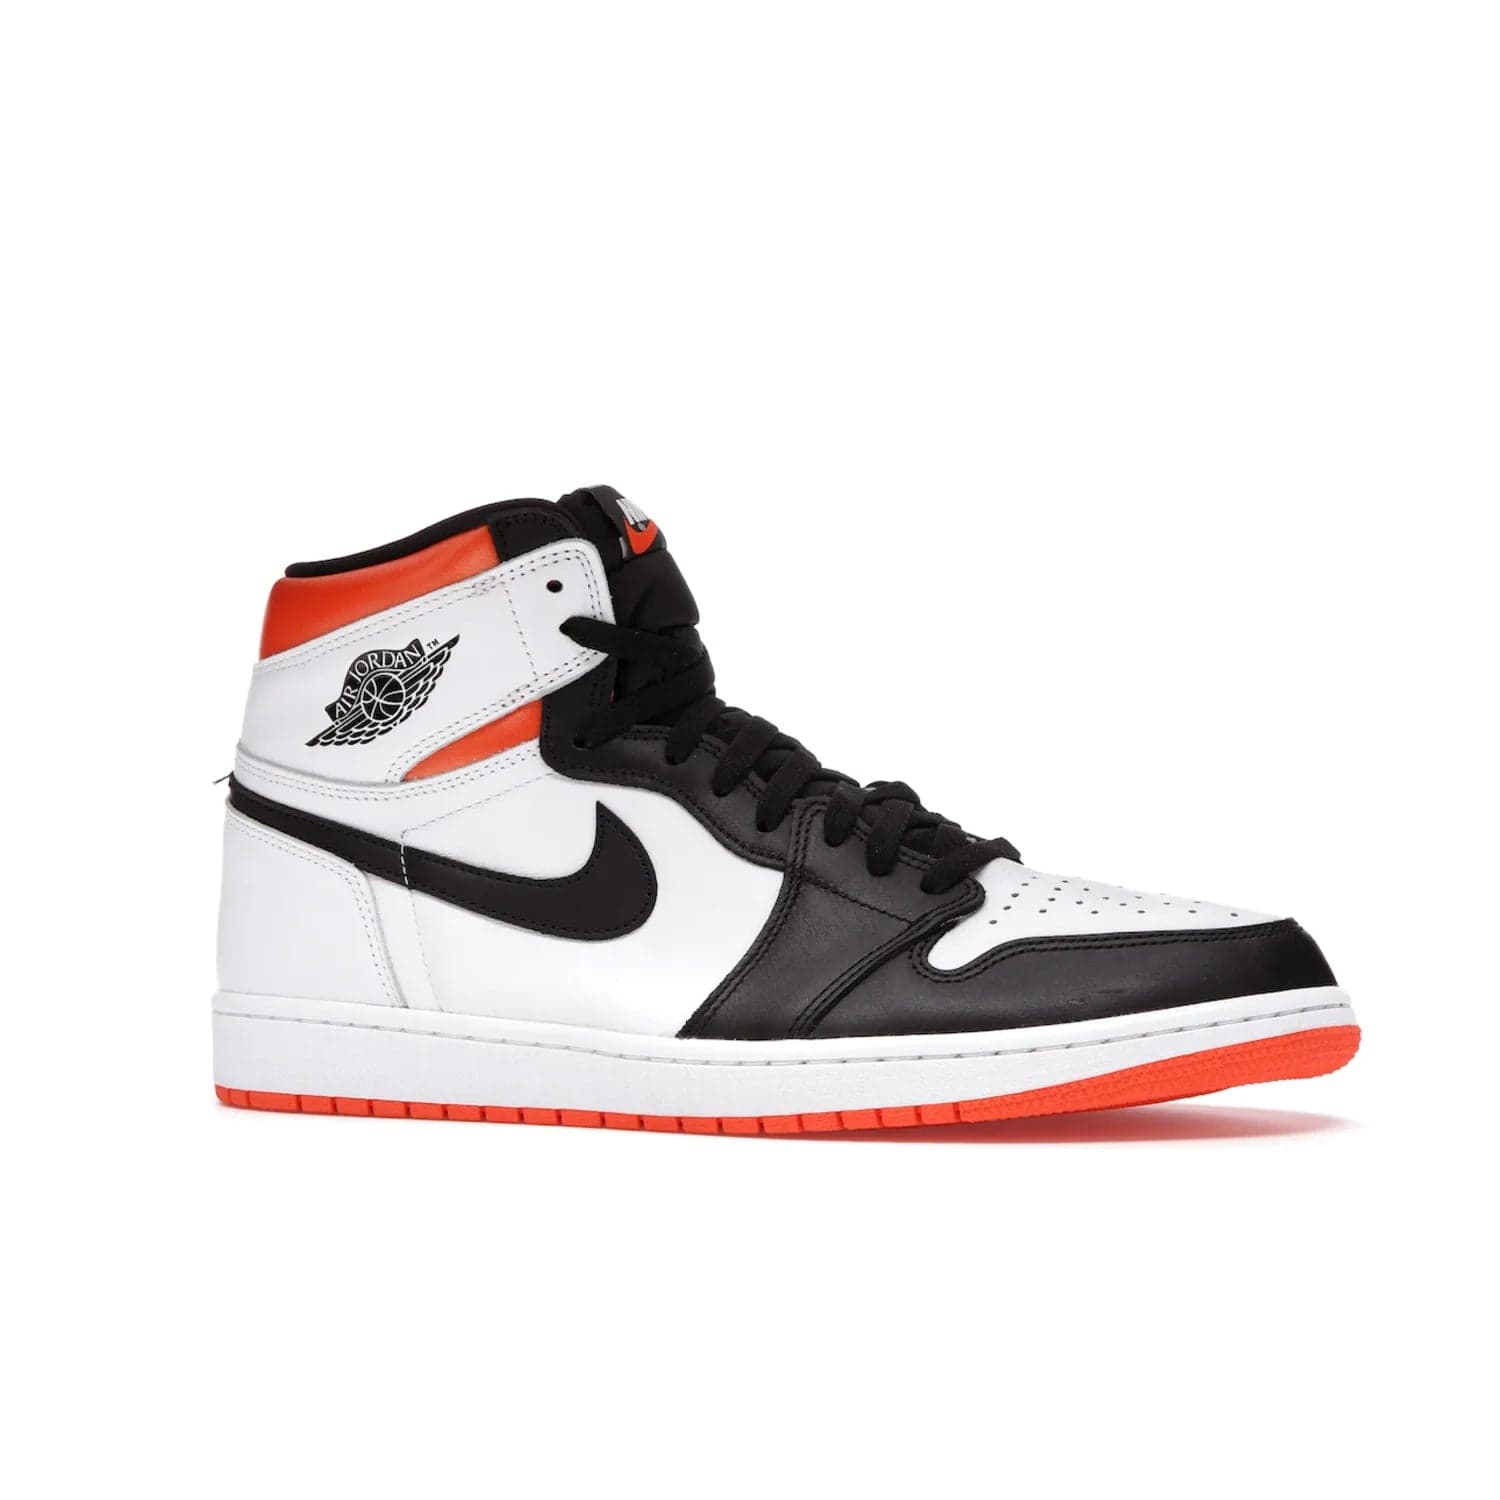 Jordan 1 Retro High Electro Orange - Image 3 - Only at www.BallersClubKickz.com - This Air Jordan 1 Retro High Electro Orange features a white leather upper with black overlays and vibrant Hyper Orange ankle wrap. Turn heads with this iconic design of woven tongue label and sole. Get yours today and add some serious style to your rotation.